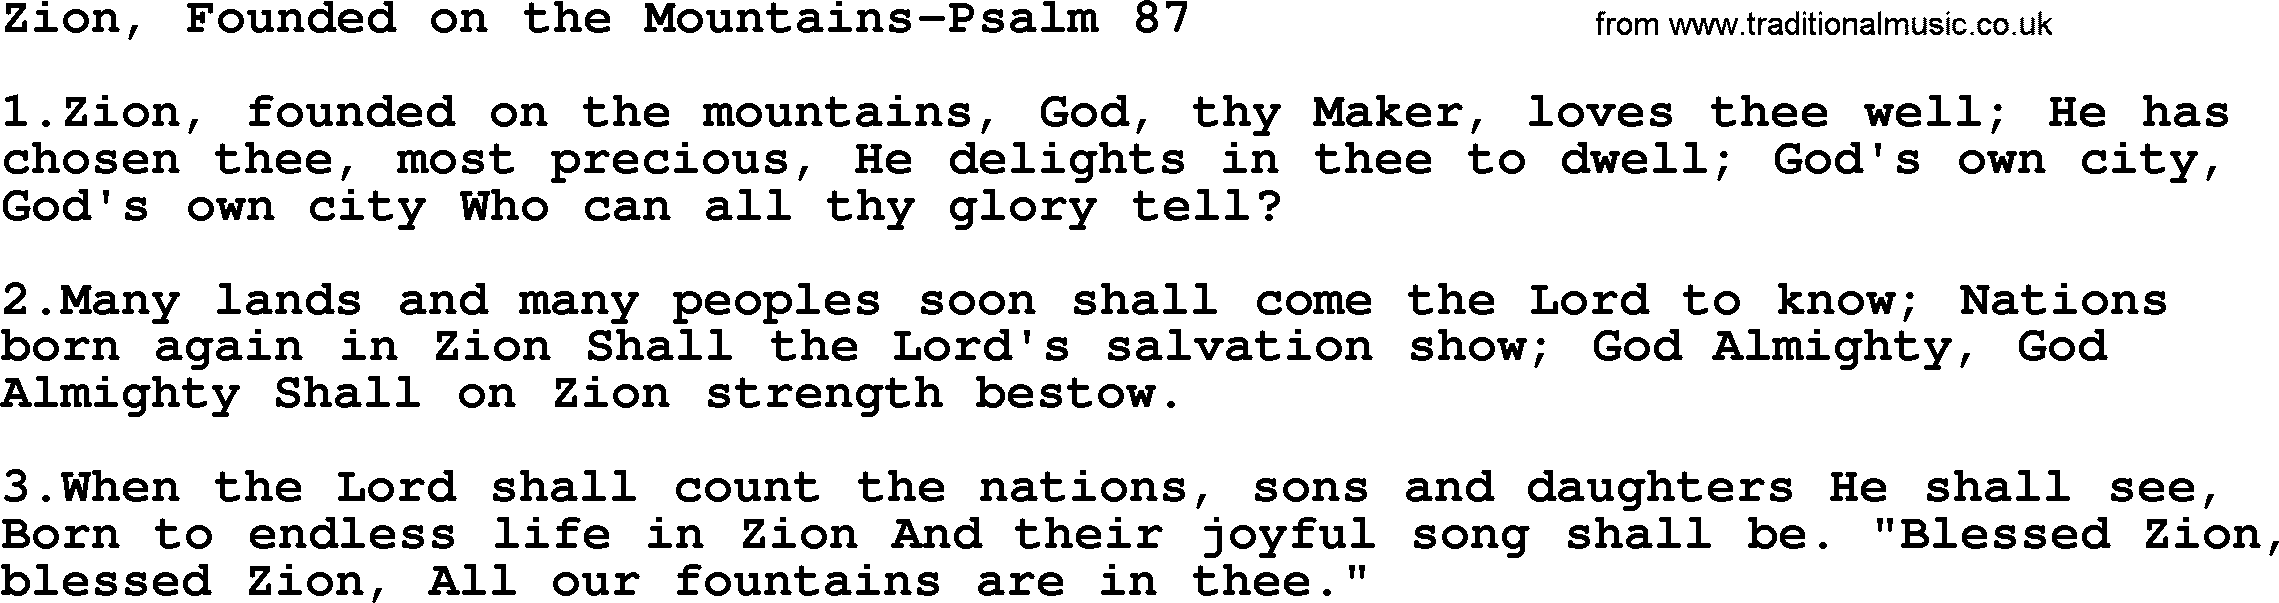 Hymns from the Psalms, Hymn: Zion, Founded On The Mountains-Psalm 87, lyrics with PDF